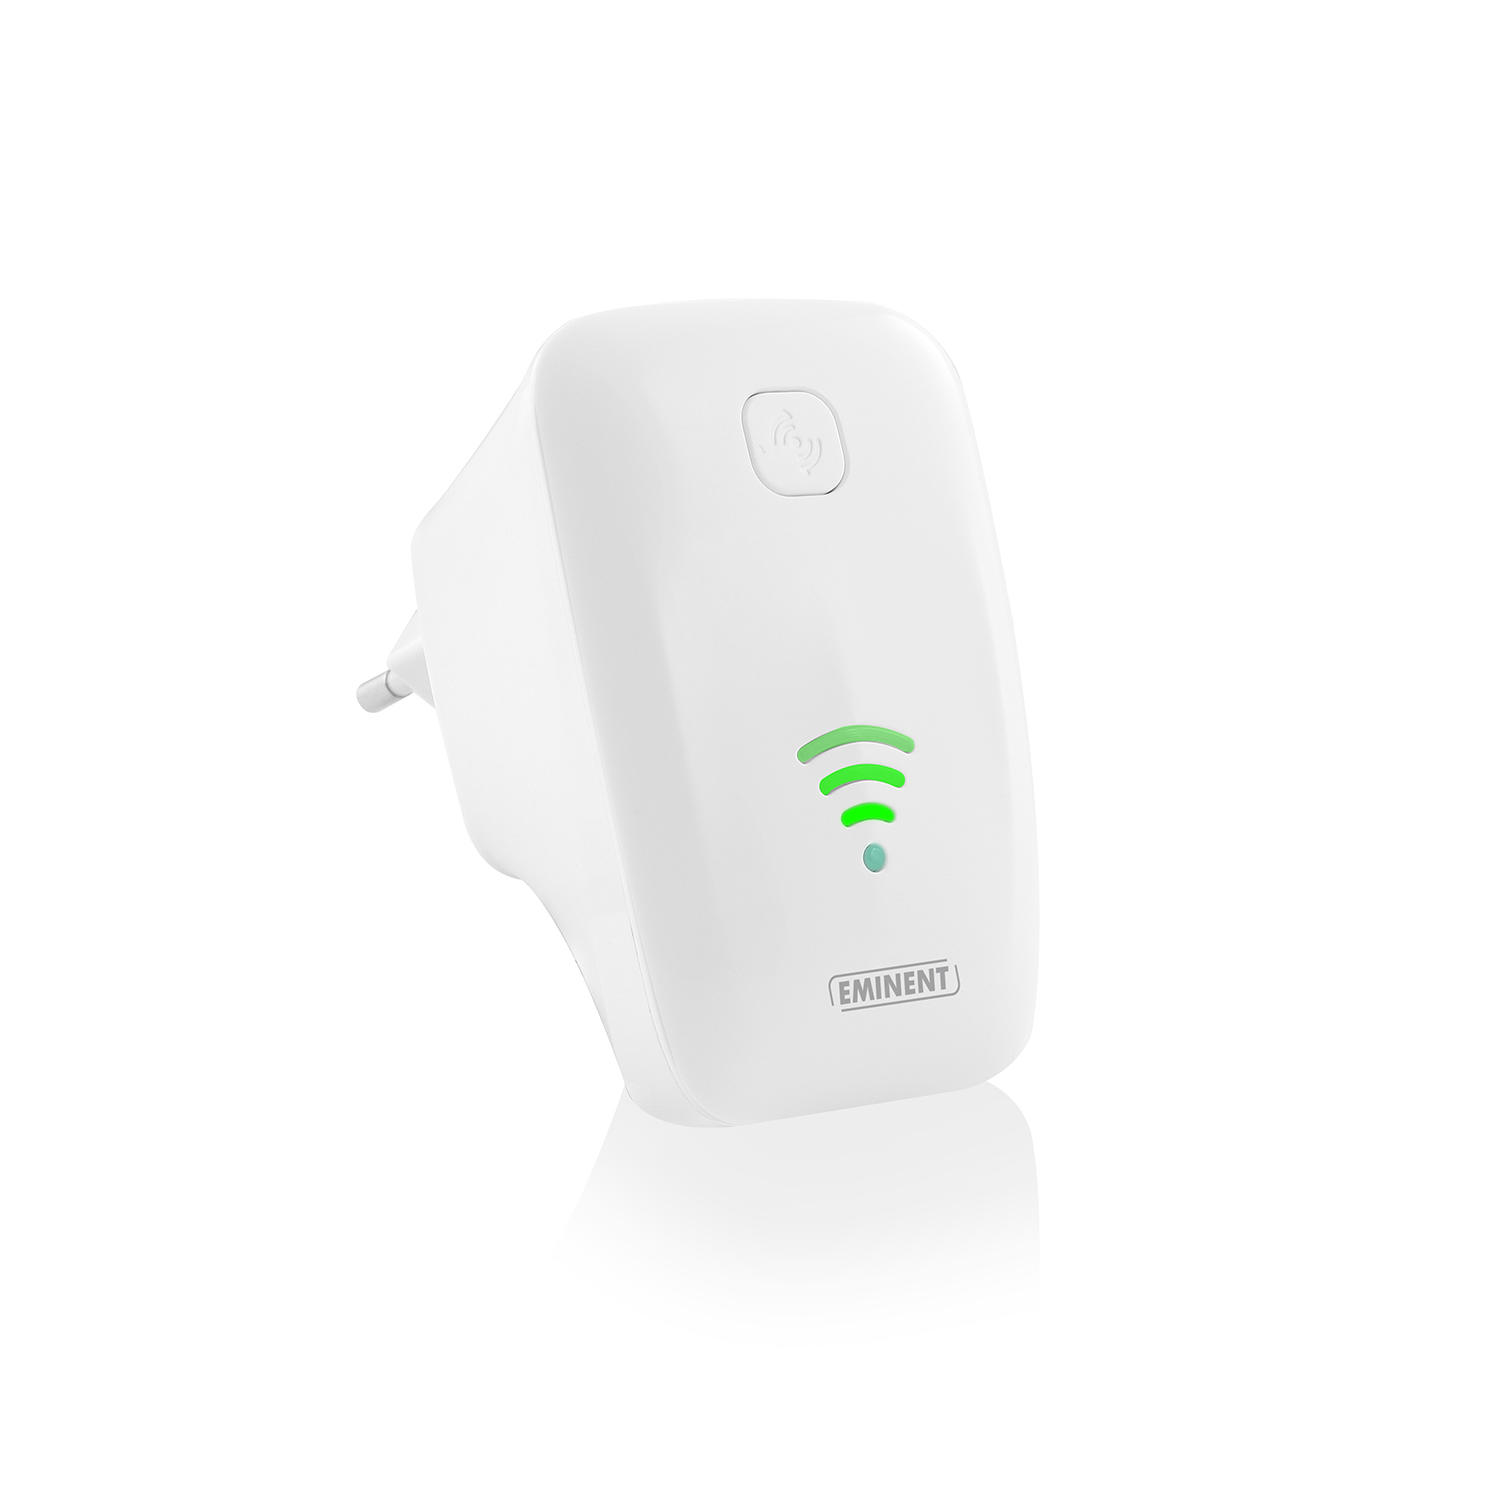 Image of EMINENT - WIFI REPEATER - Eminent